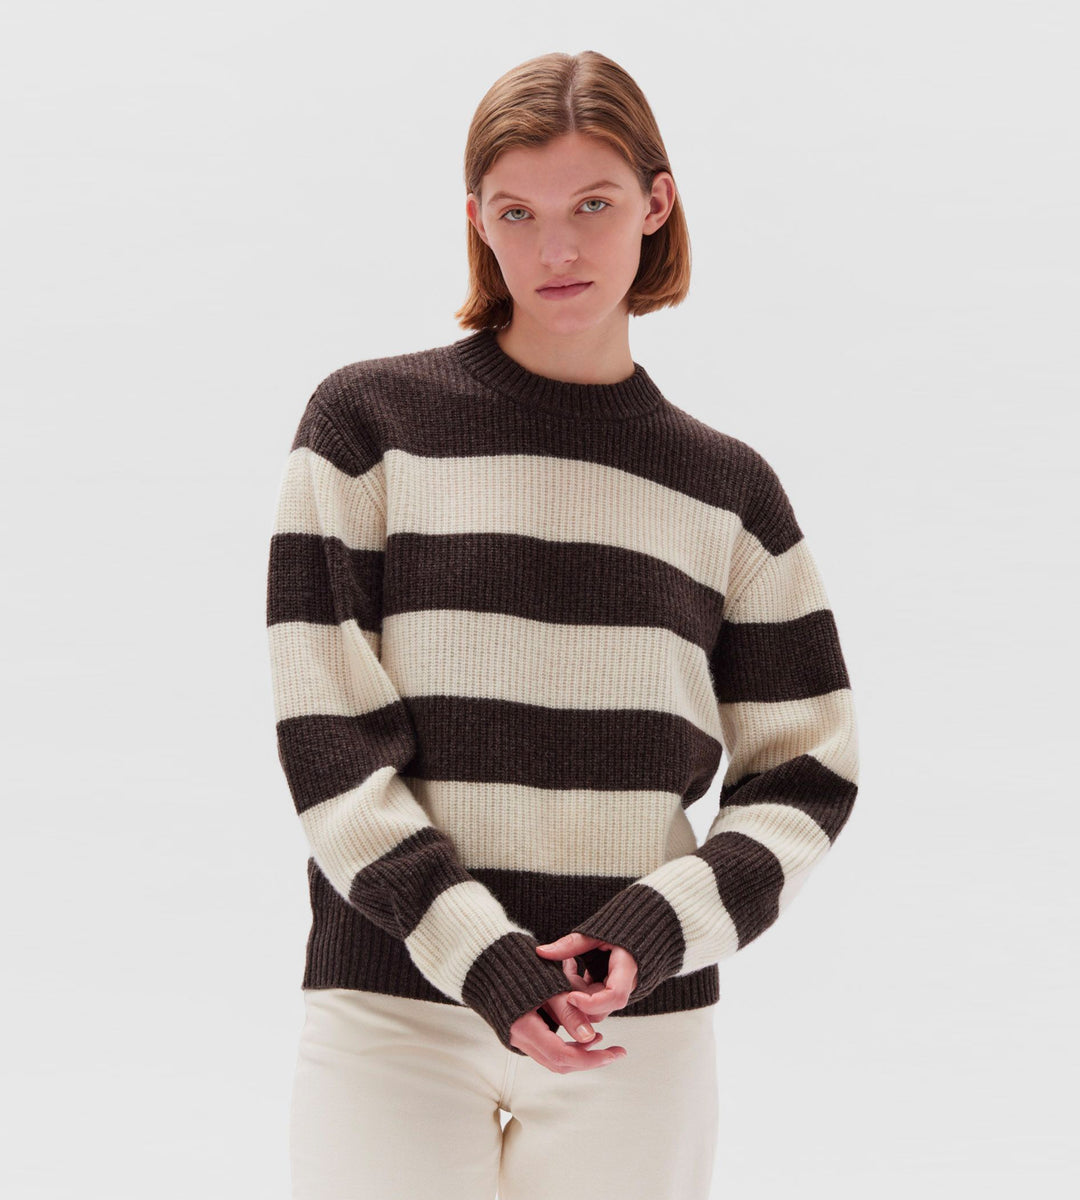 Assembly Label | Mila Stripe Brushed Knit | Cocoa / Cream Stripe